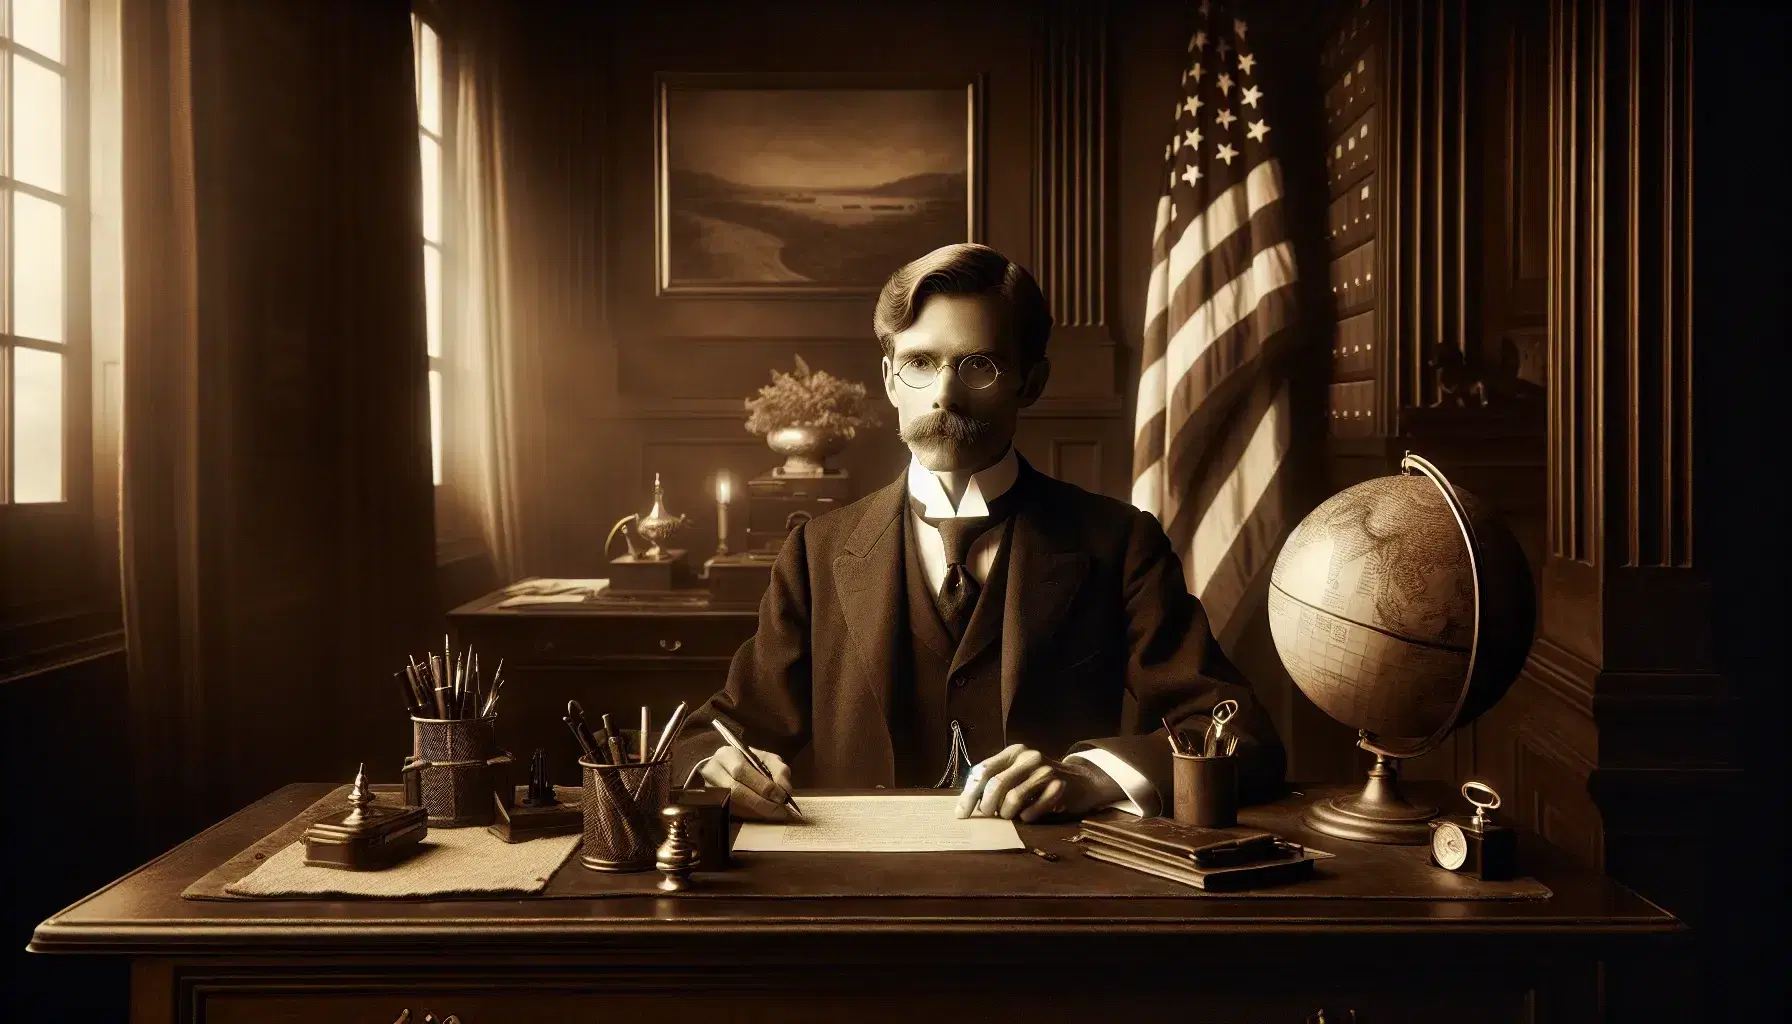 Early 20th-century historical figure with pince-nez glasses seated at desk, American flag in background, globe to the side, and vintage office items.